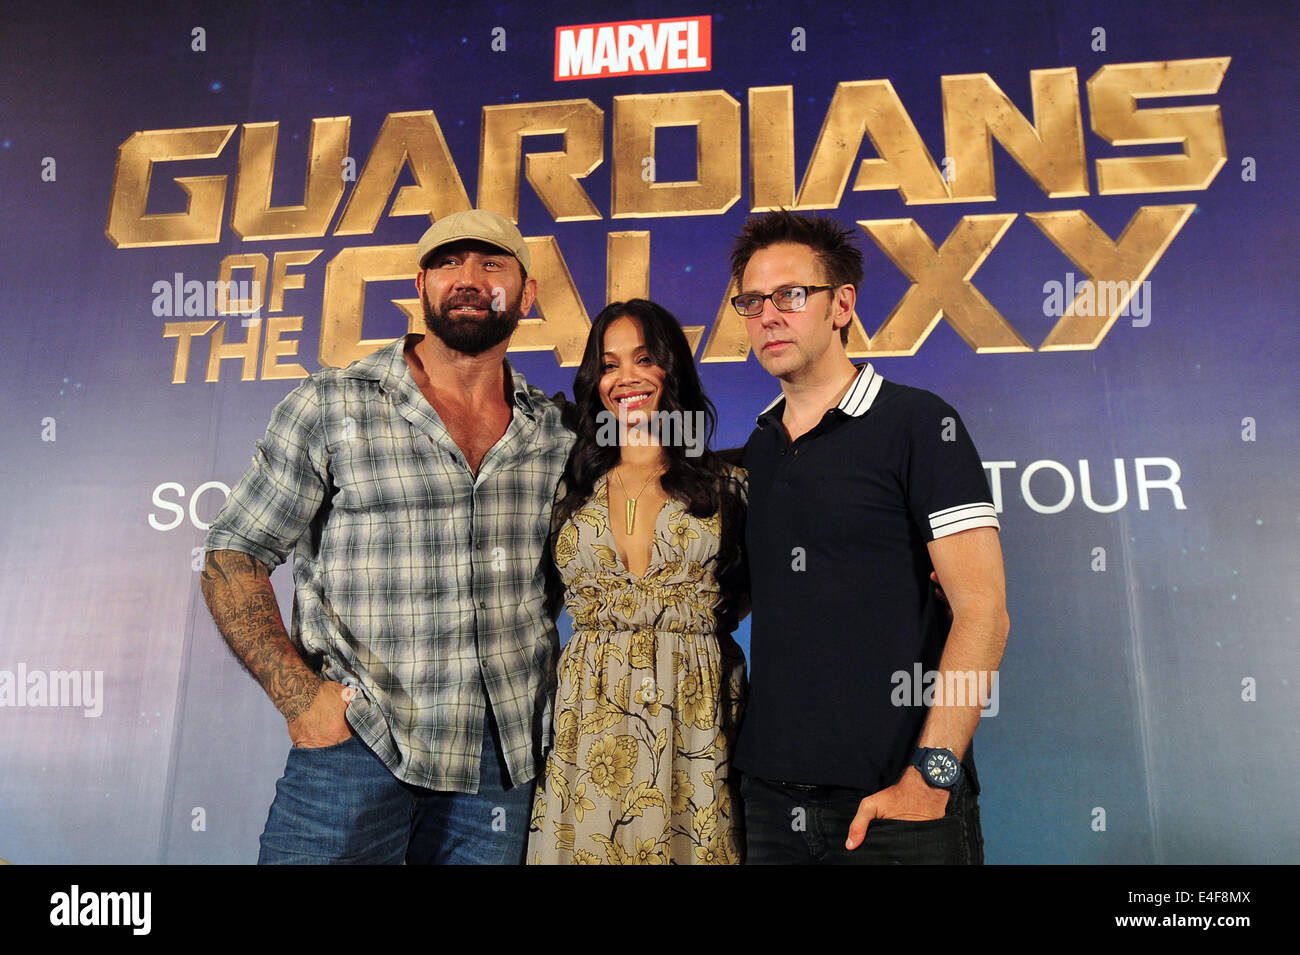 Singapore. 10th July, 2014. Director James Gunn (R), actor Dave Batista (L) and actress Zoe Saldana attend a press conference of the American movie 'Guardians of the Galaxy' held in Singapore's Marina Bay Sands Expo on July 10, 2014 as part of their South East Asia media tour. Credit:  Then Chih Wey/Xinhua/Alamy Live News Stock Photo